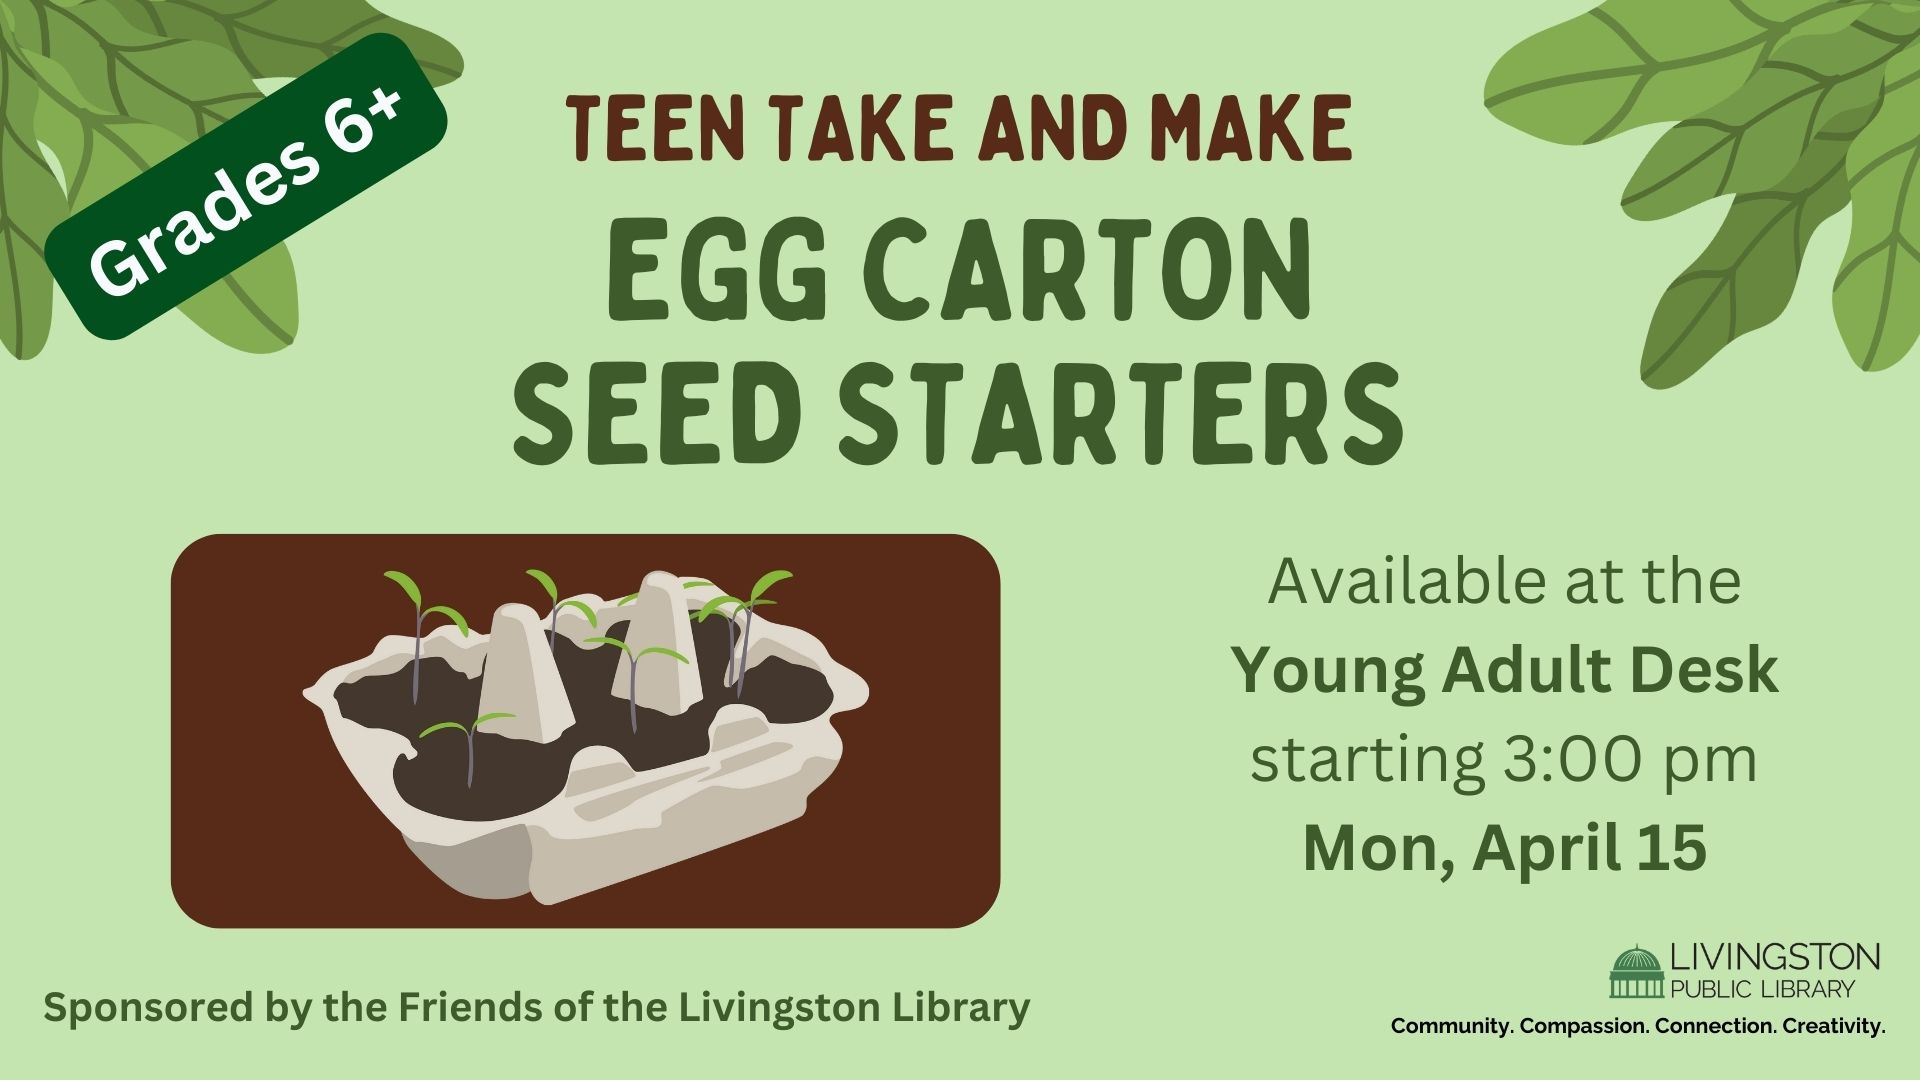 Teen Take and Make: Egg Carton Seed Starters. Grades 6+. Available at the Young Adult Desk starting 3:00 pm Mon, April 15. Livingston library logo. Community. Compassion. Connection. Creativity. Sponsored by the Friends of the Livingston Library.